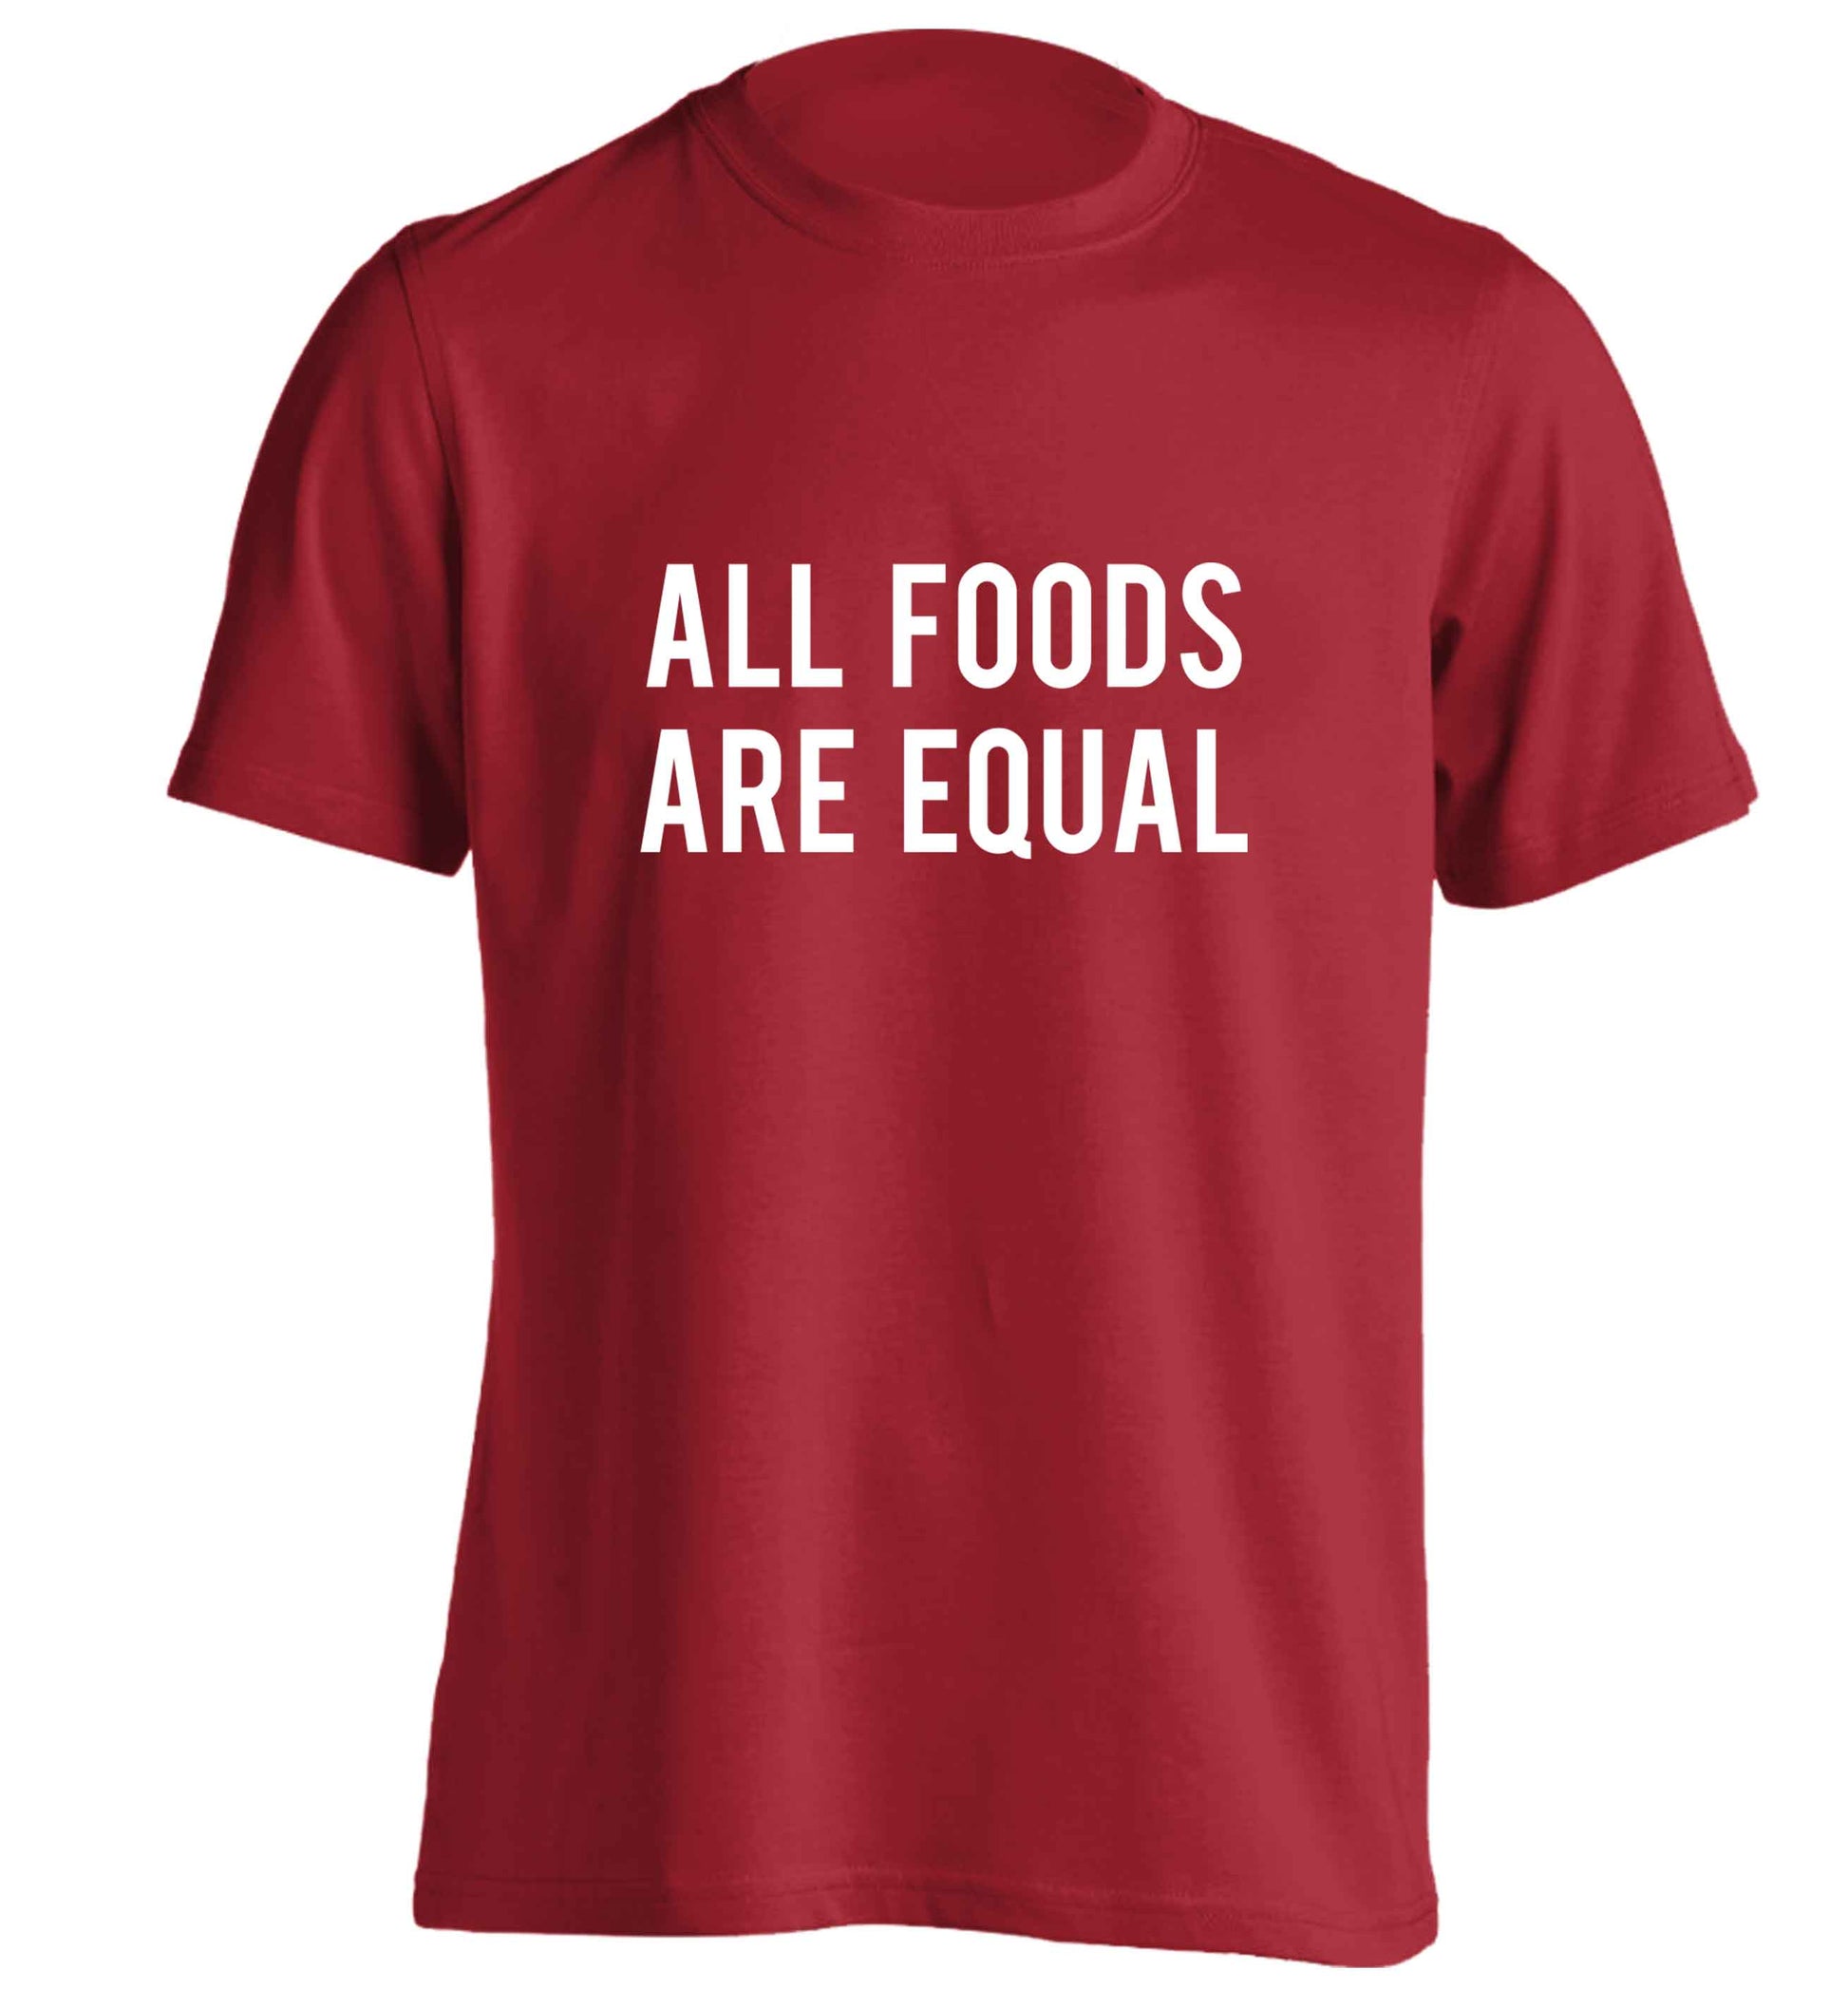 All foods are equal adults unisex red Tshirt 2XL